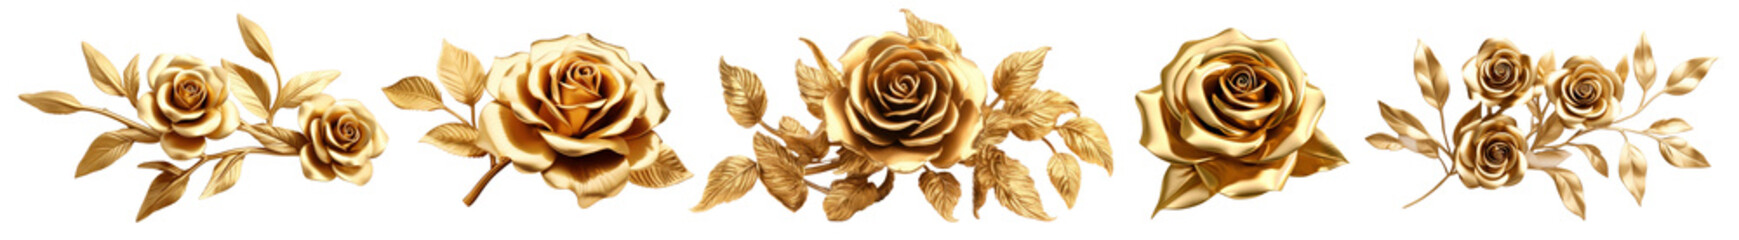 Wall Mural - 3D gold Roses flowers png on transparent background